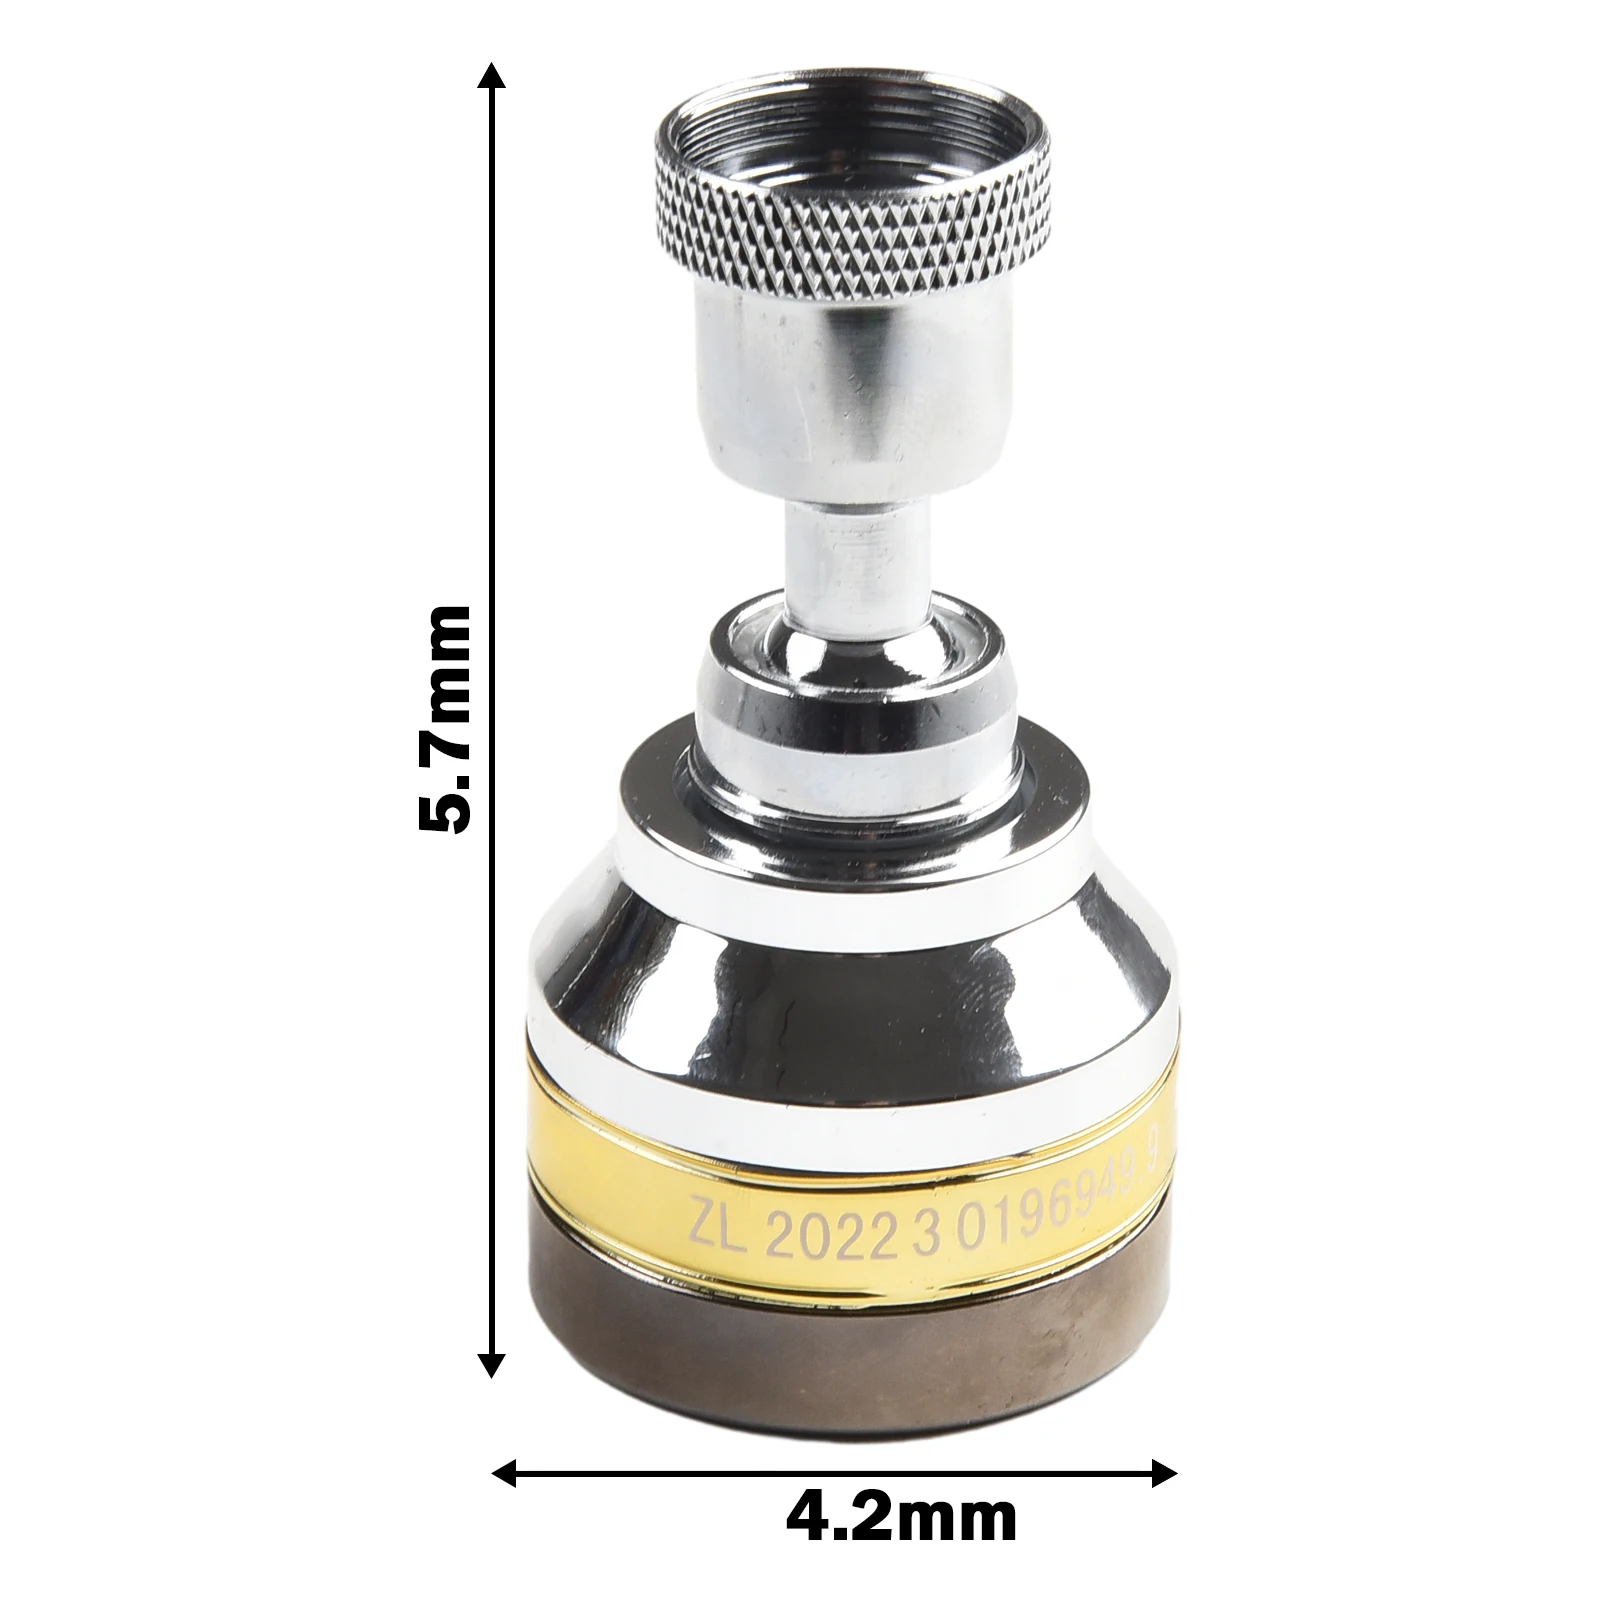 

Universal Booster Extender Faucet None 5.7*4.2cm Brass Dual Extender Faucet Faucet Aerator Faucet Nozzle Function